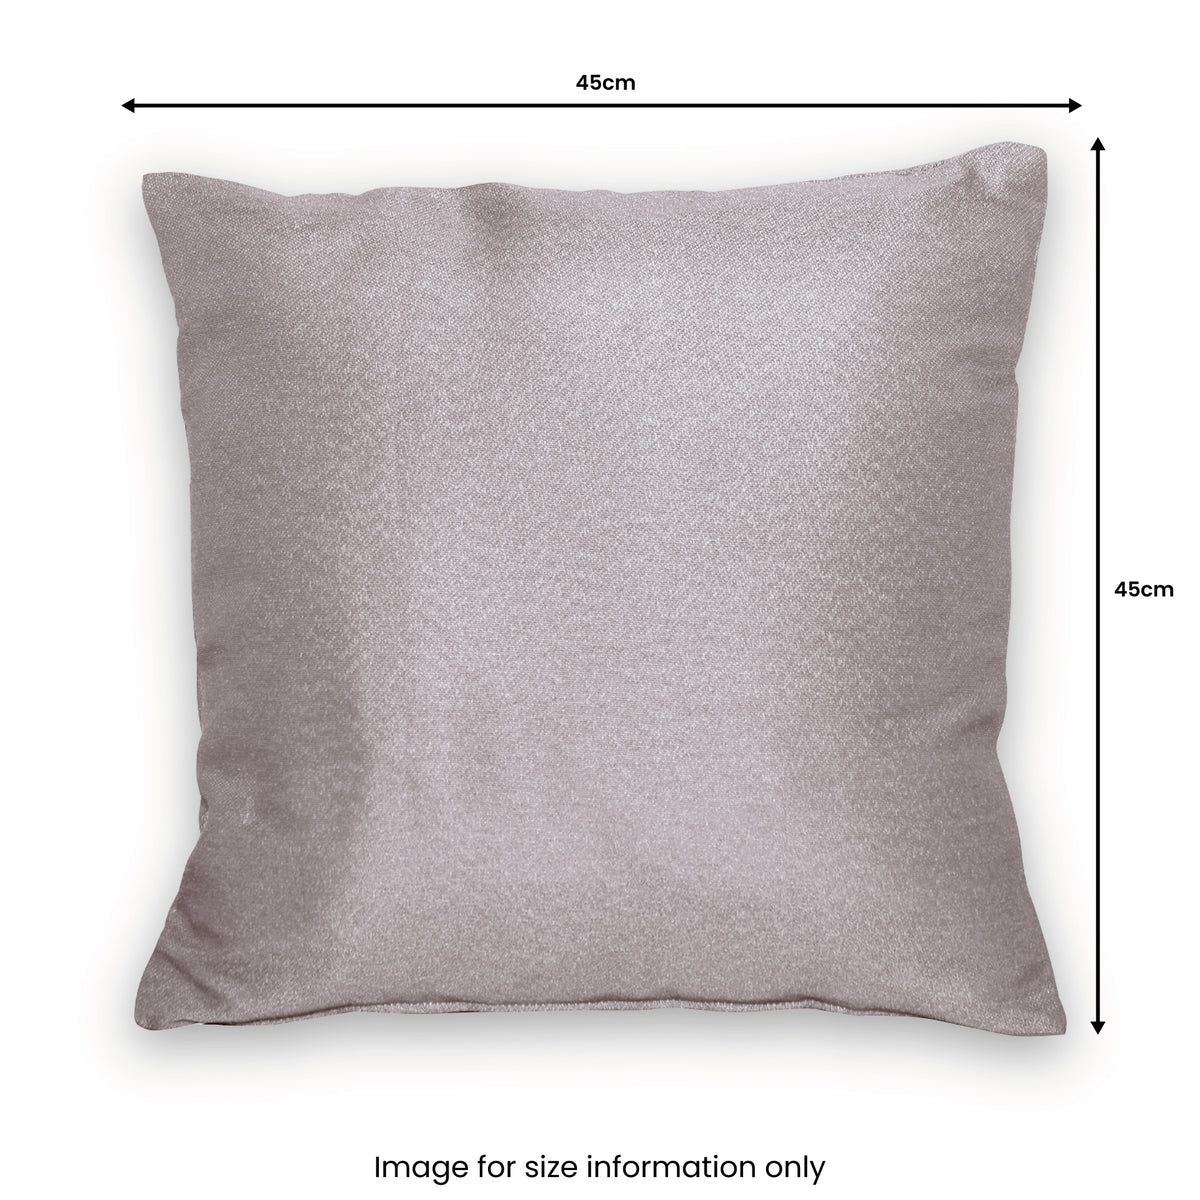 Outdoor Grey Plain Scatter Cushion dimensions